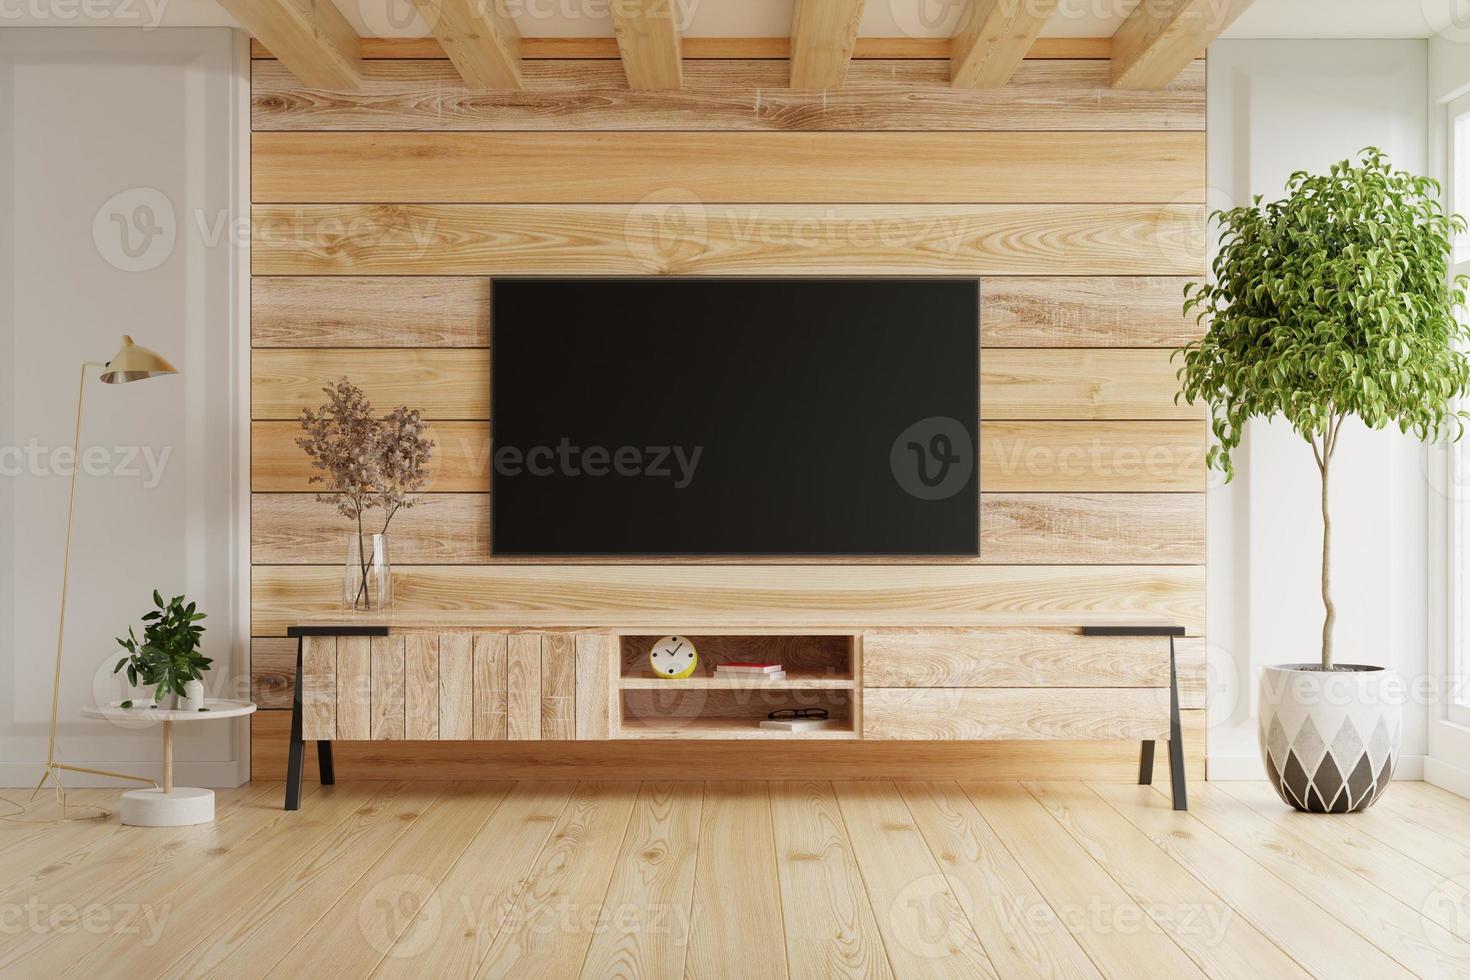 TV LED on the cabinet in modern living room on wooden wall background.  5285949 Stock Photo at Vecteezy